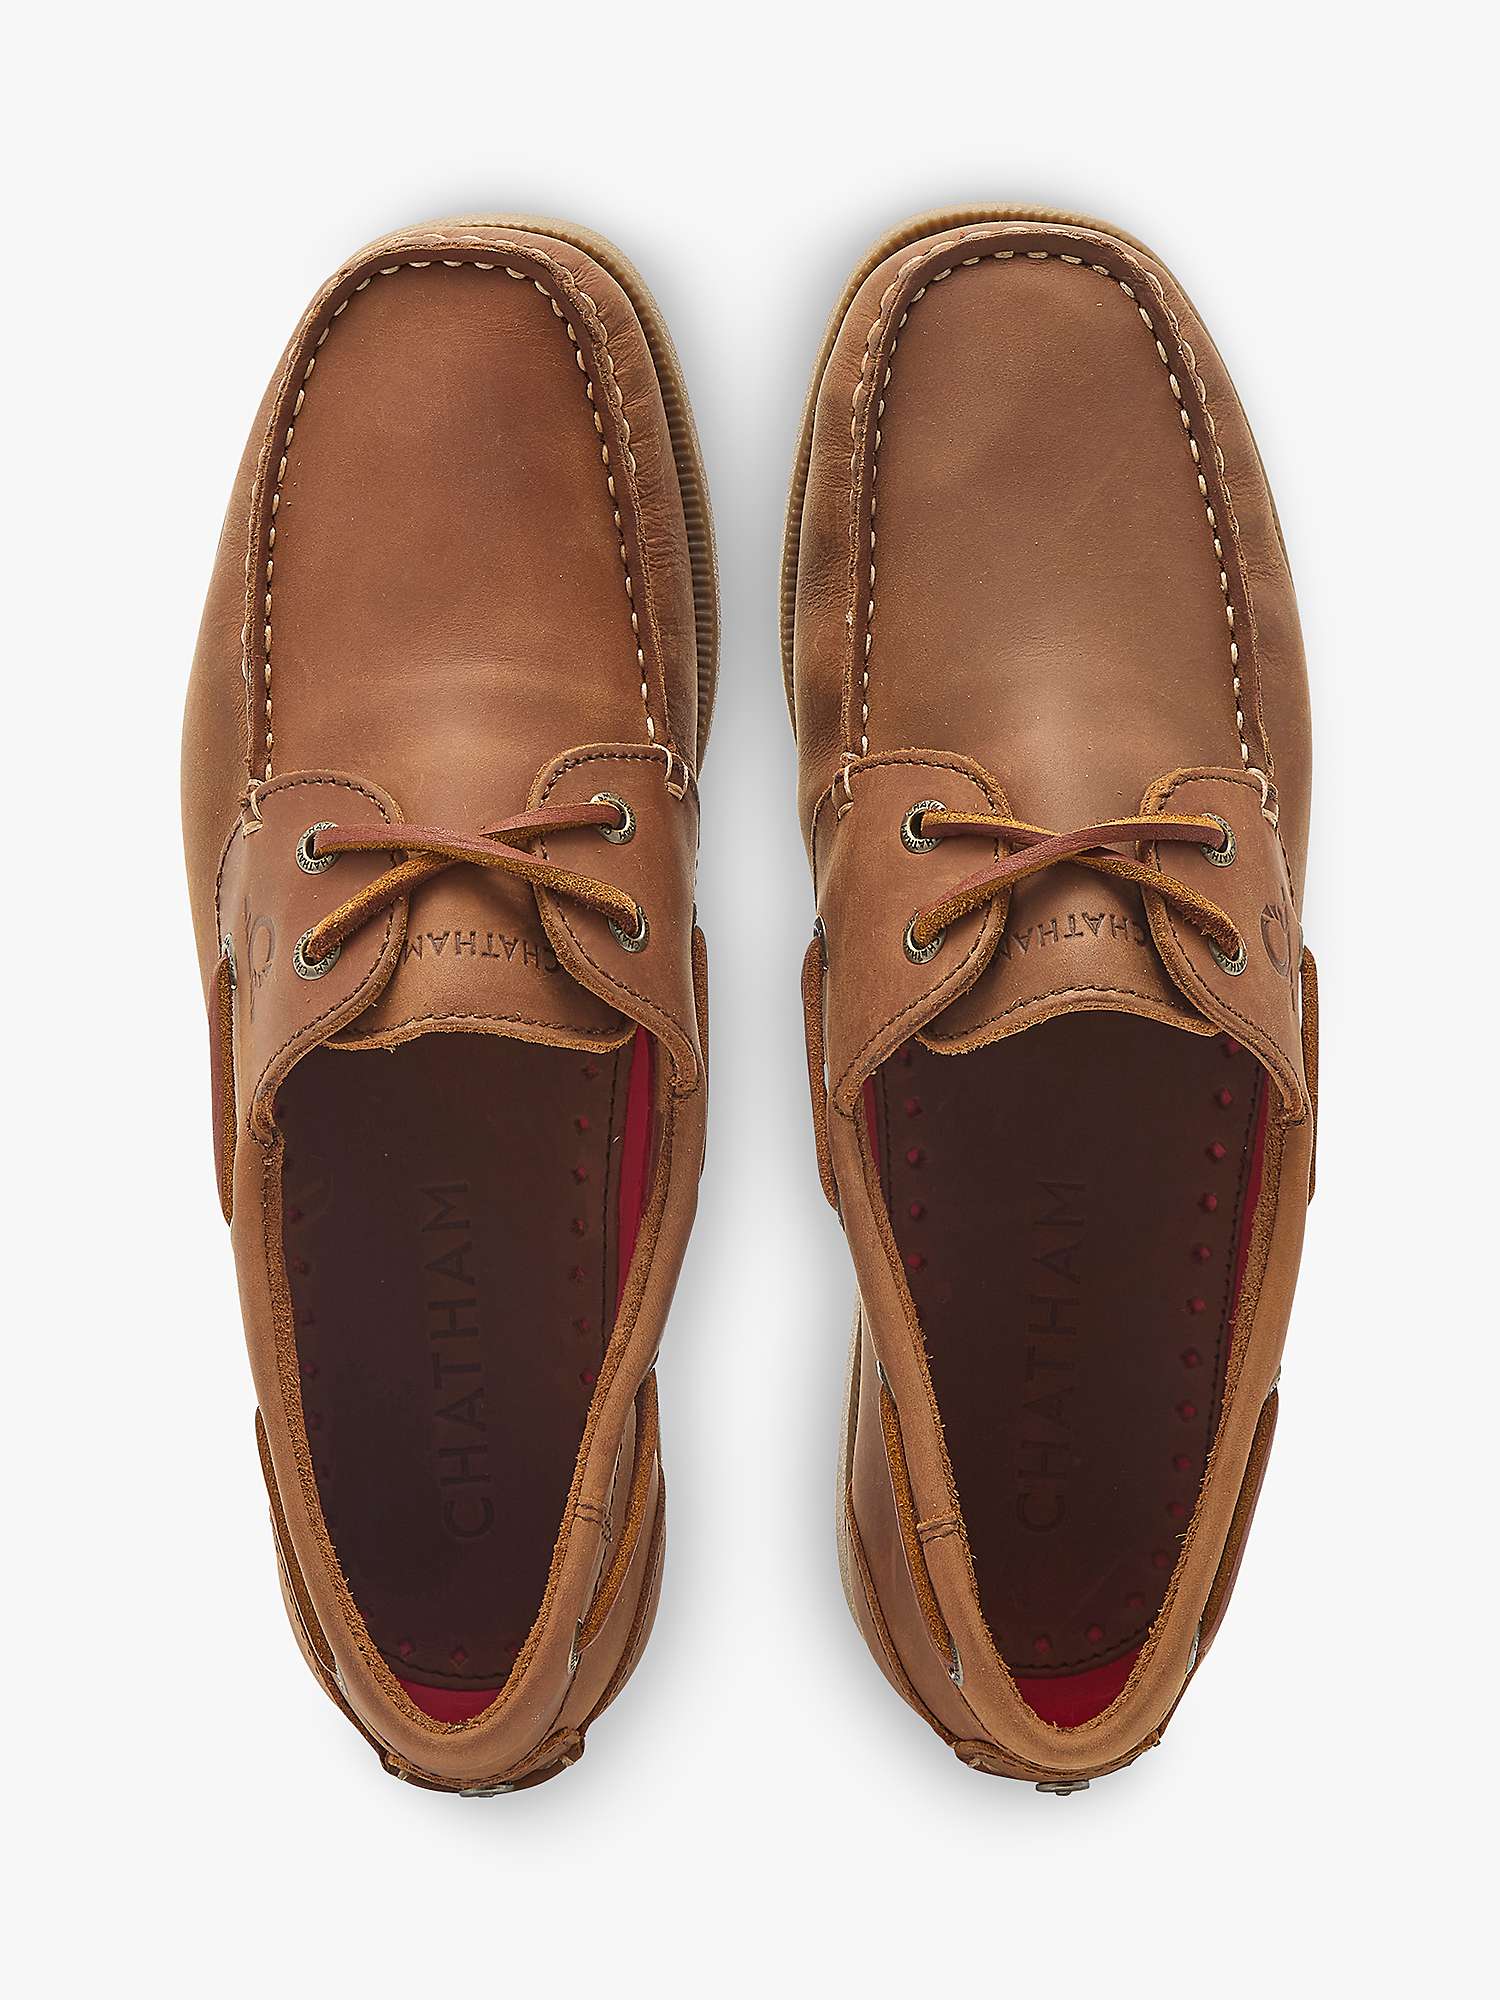 Buy Chatham Galley II Leather Boat Shoes, Dark Tan Online at johnlewis.com